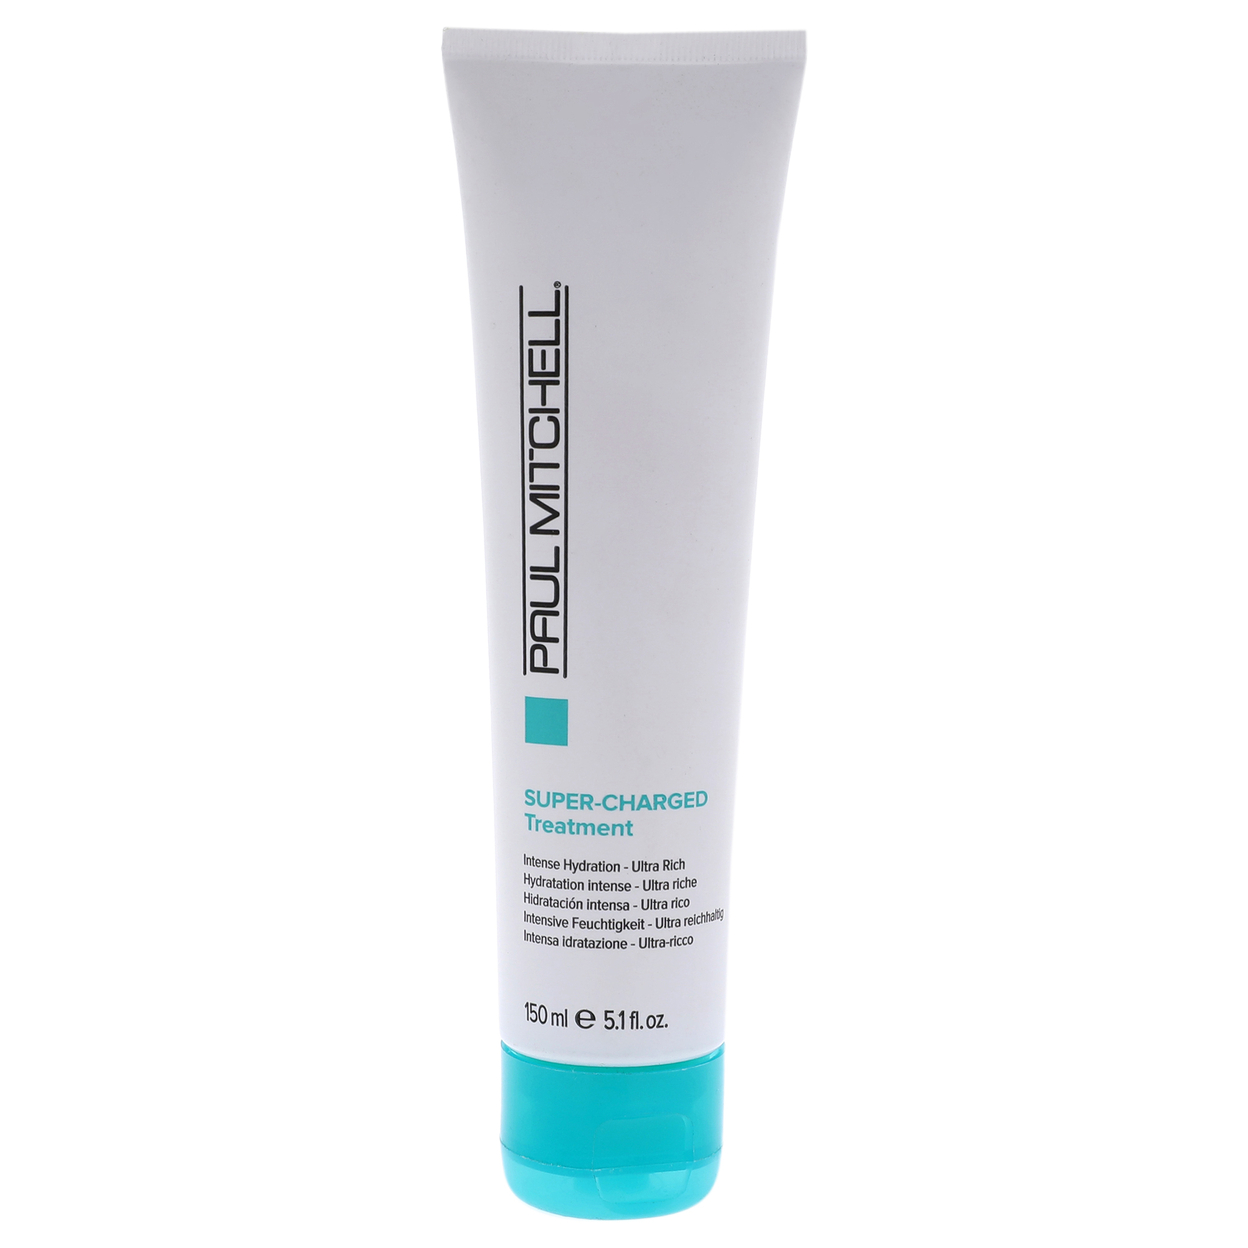 Paul Mitchell Super Charged Treatment 5.1 Oz